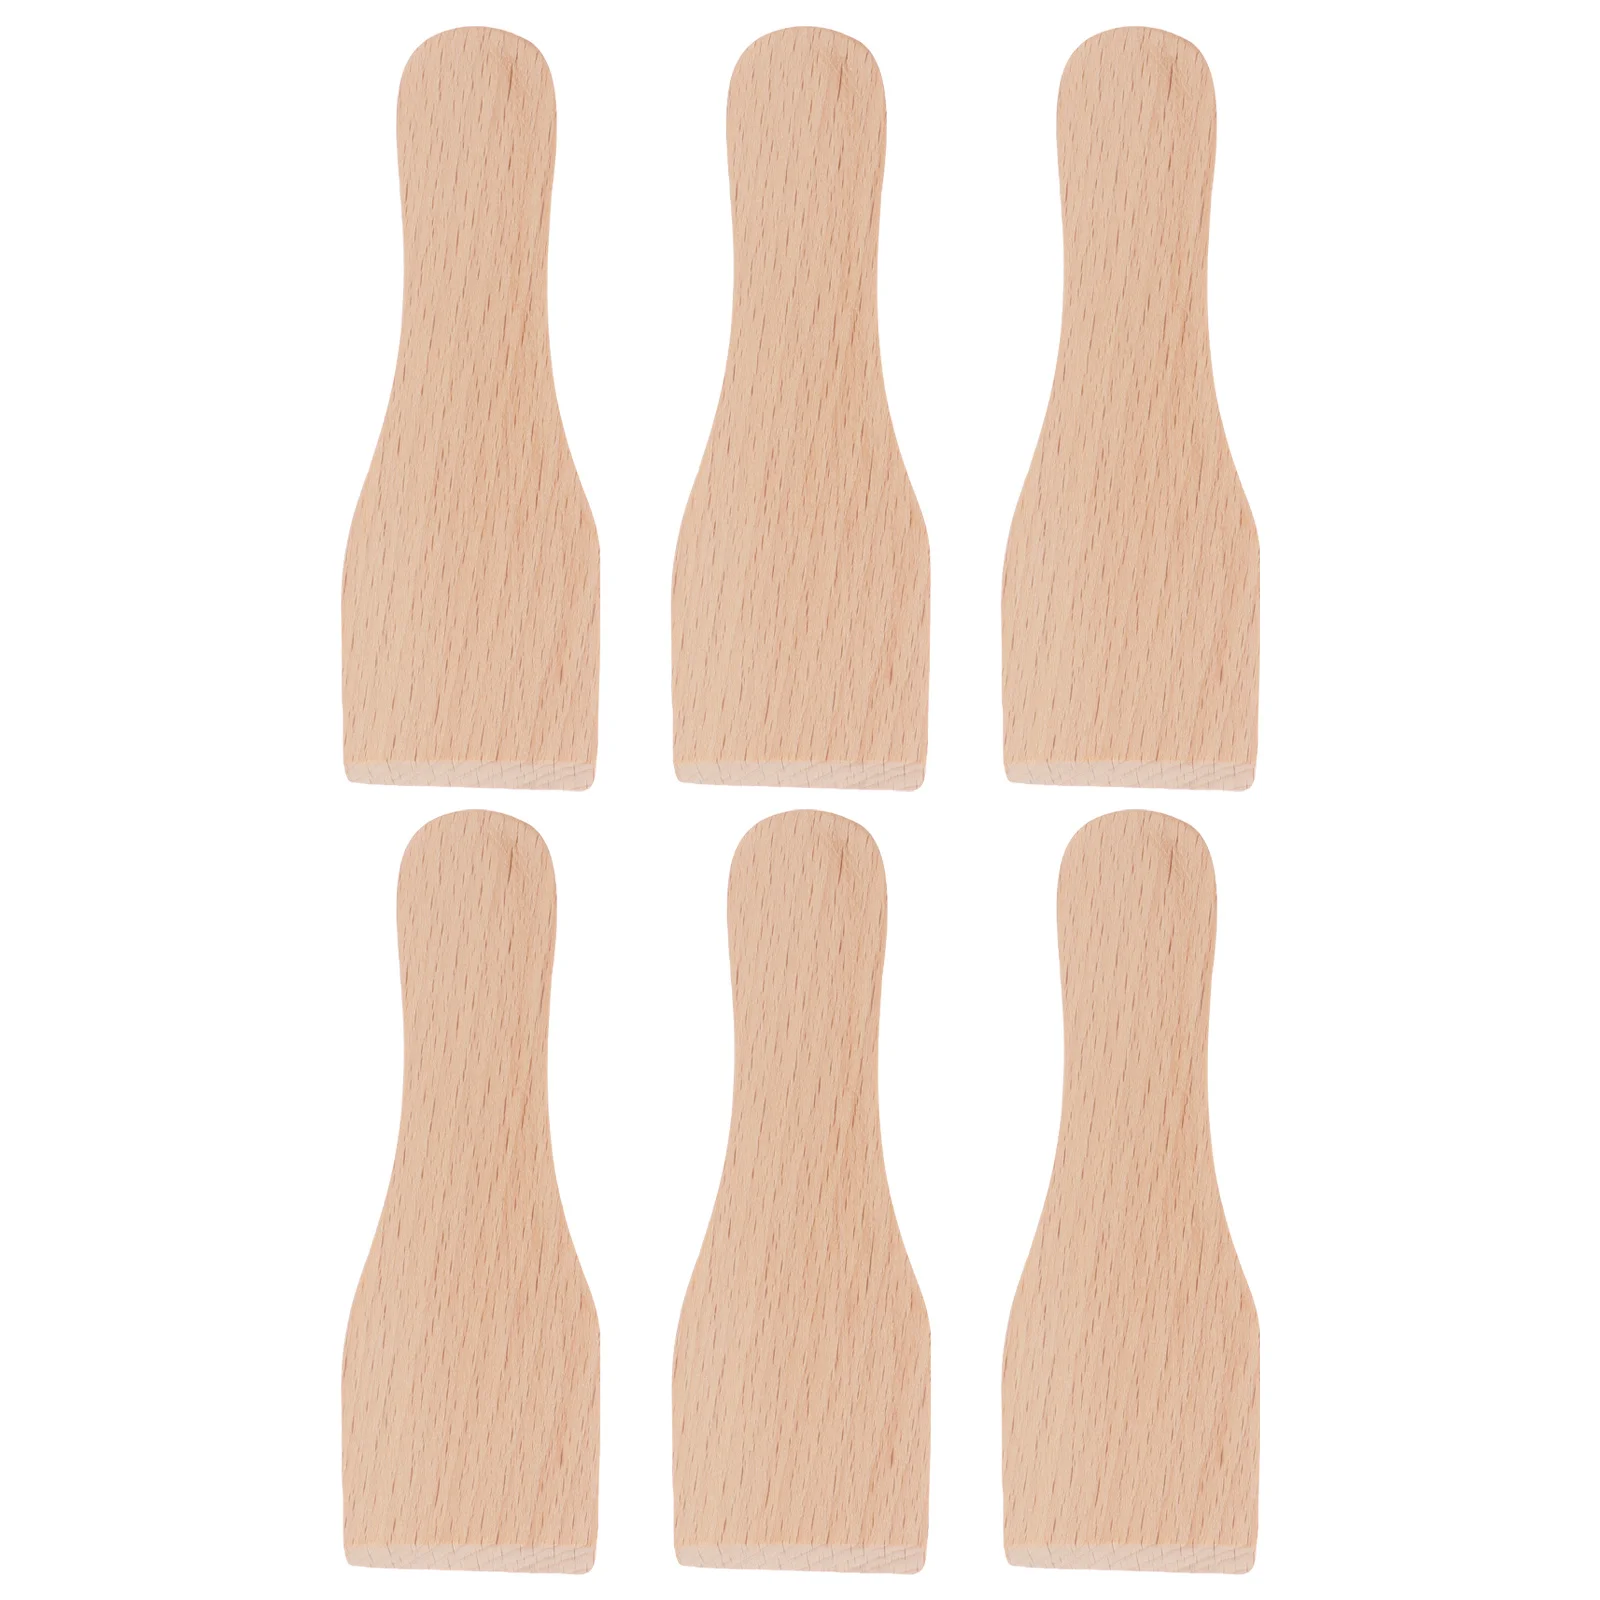 

6 Pcs Small Wooden Household Baking Scraper Spatula Cake Cheese Cooking Kitchen Butter Bread Utensil Server Safe